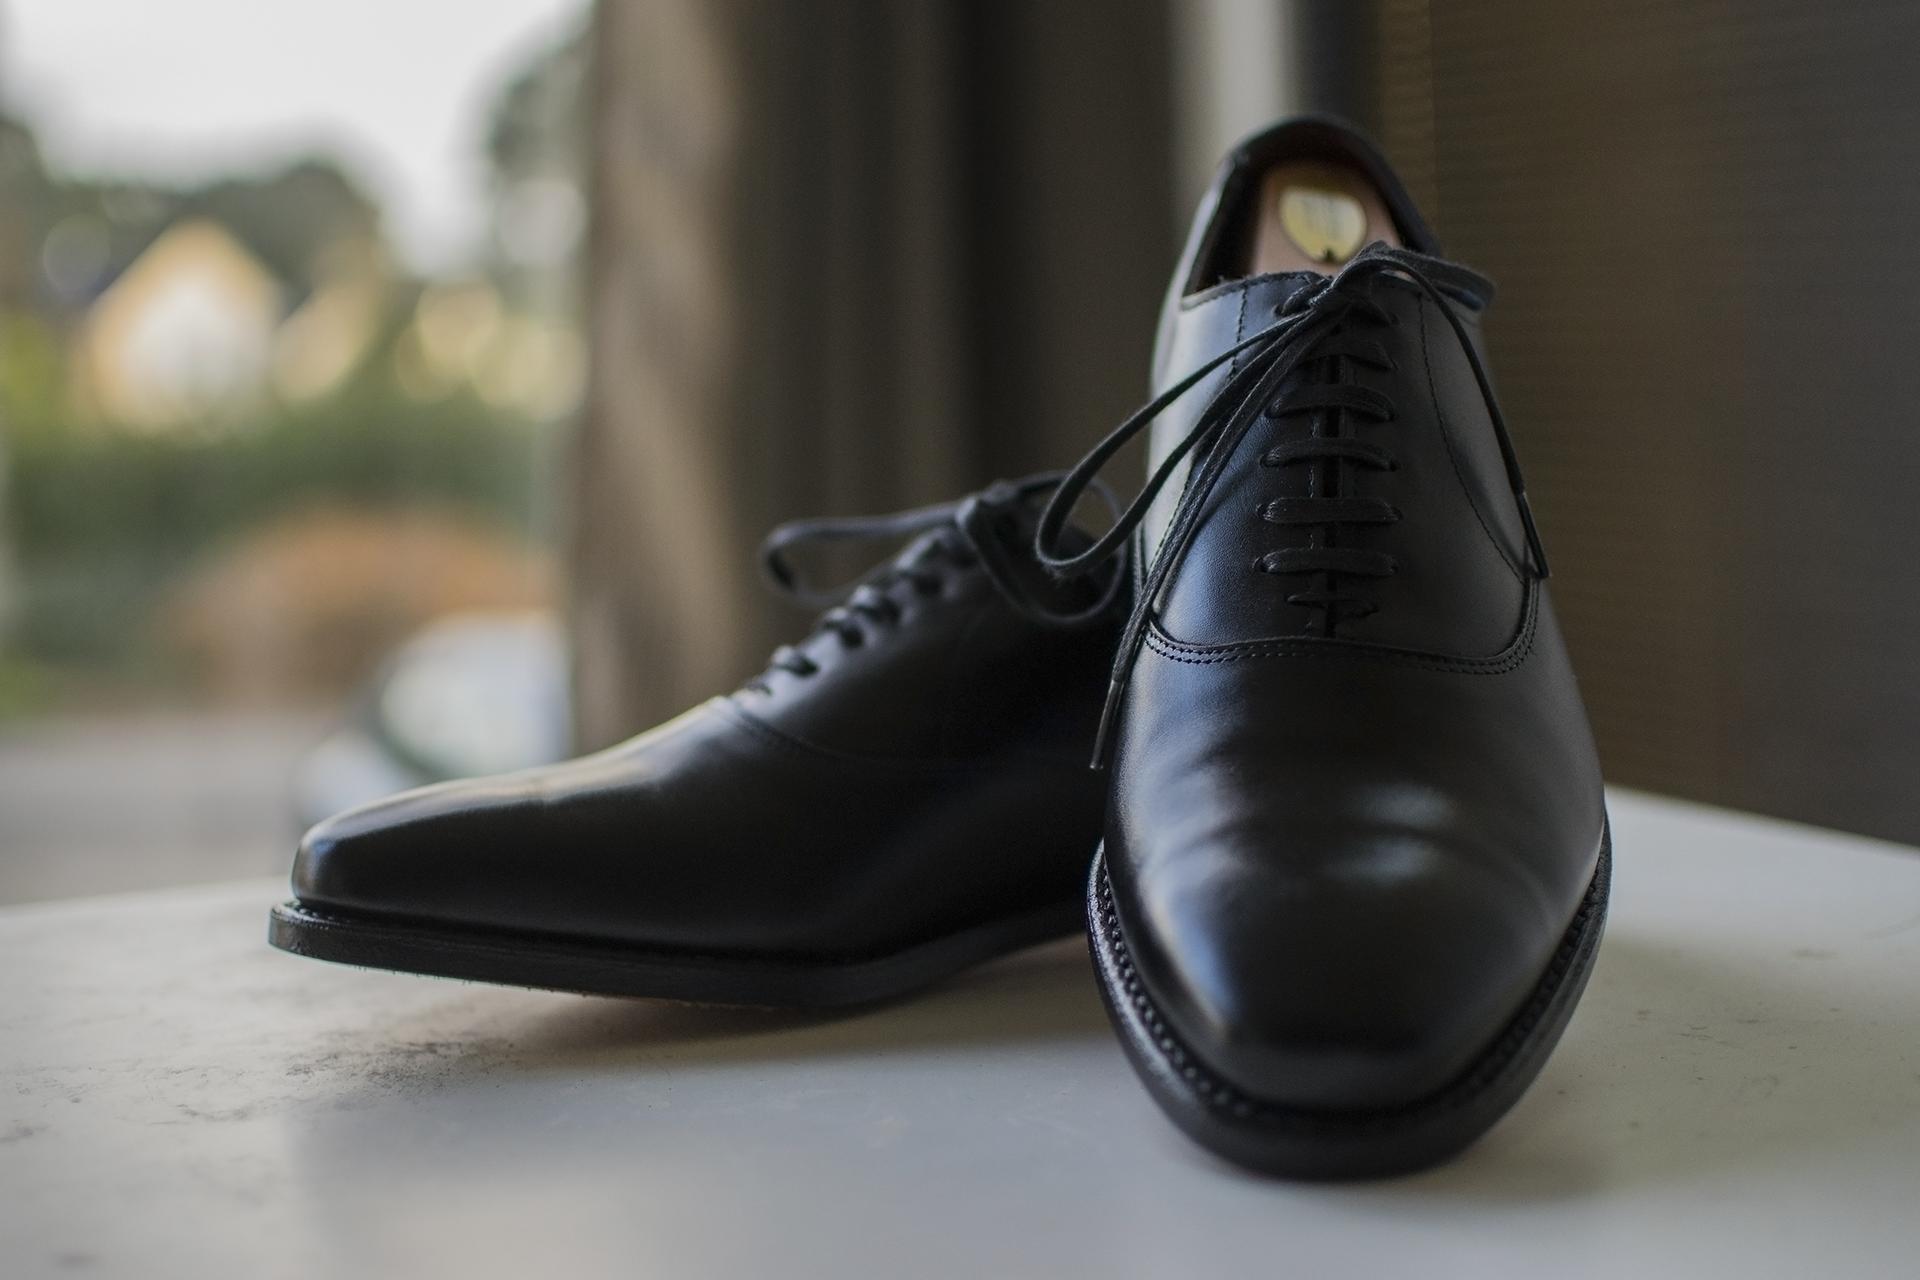 The Only 4 Dress Shoes You Need, According to This Shoe Company's CEO